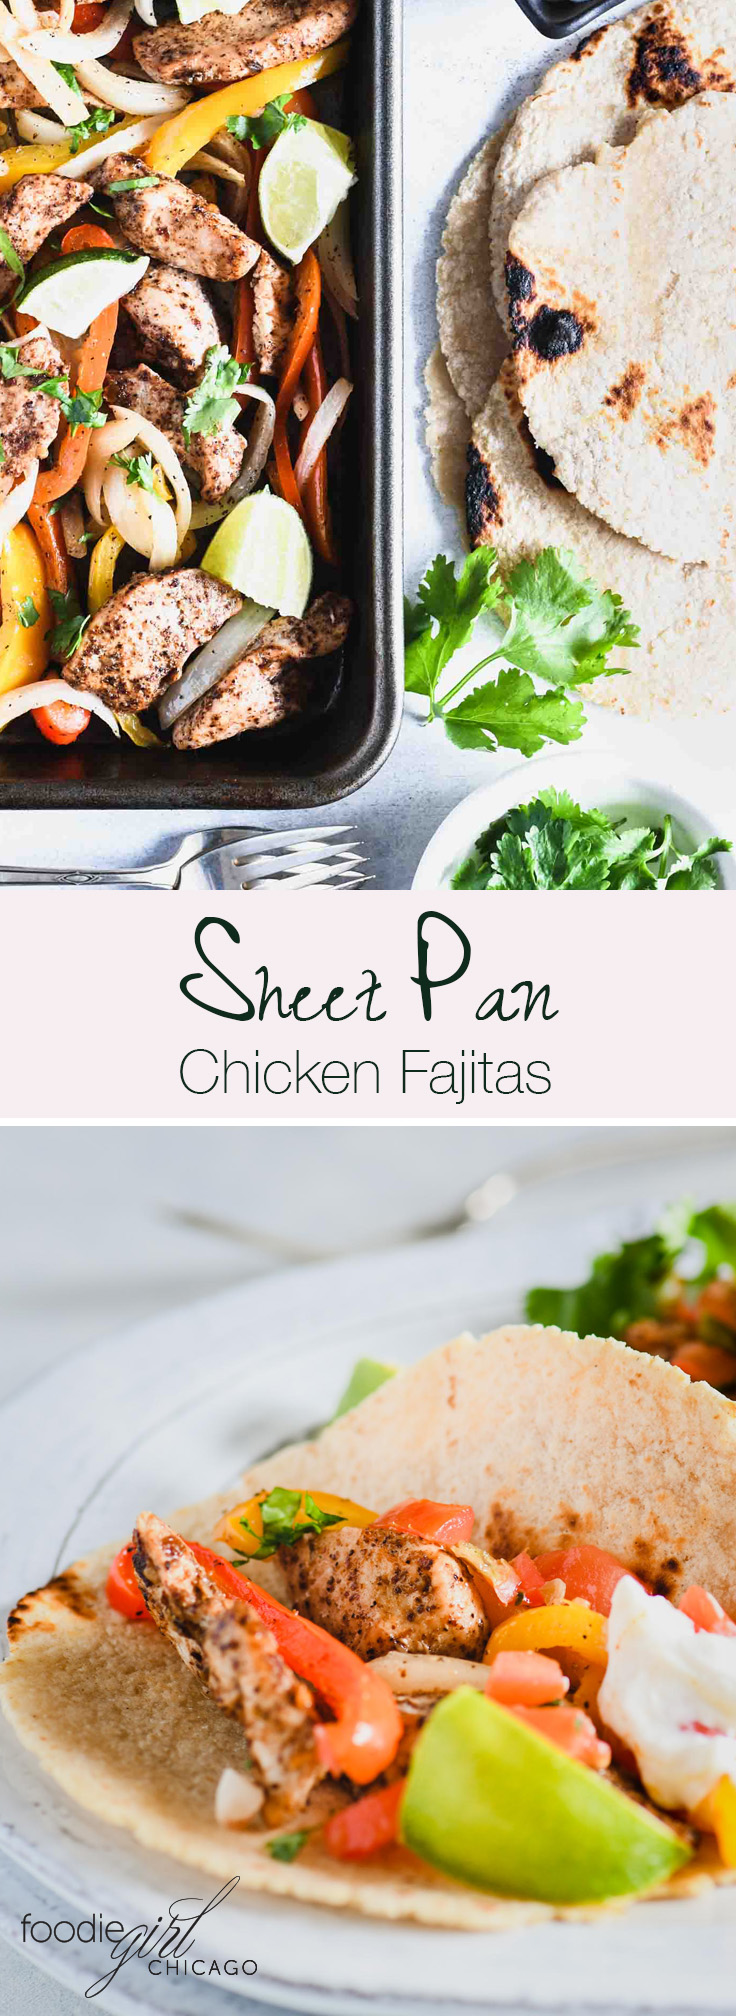 These sheet pan chicken fajitas are easy and healthy – what more could you ask for in a weeknight meal?!